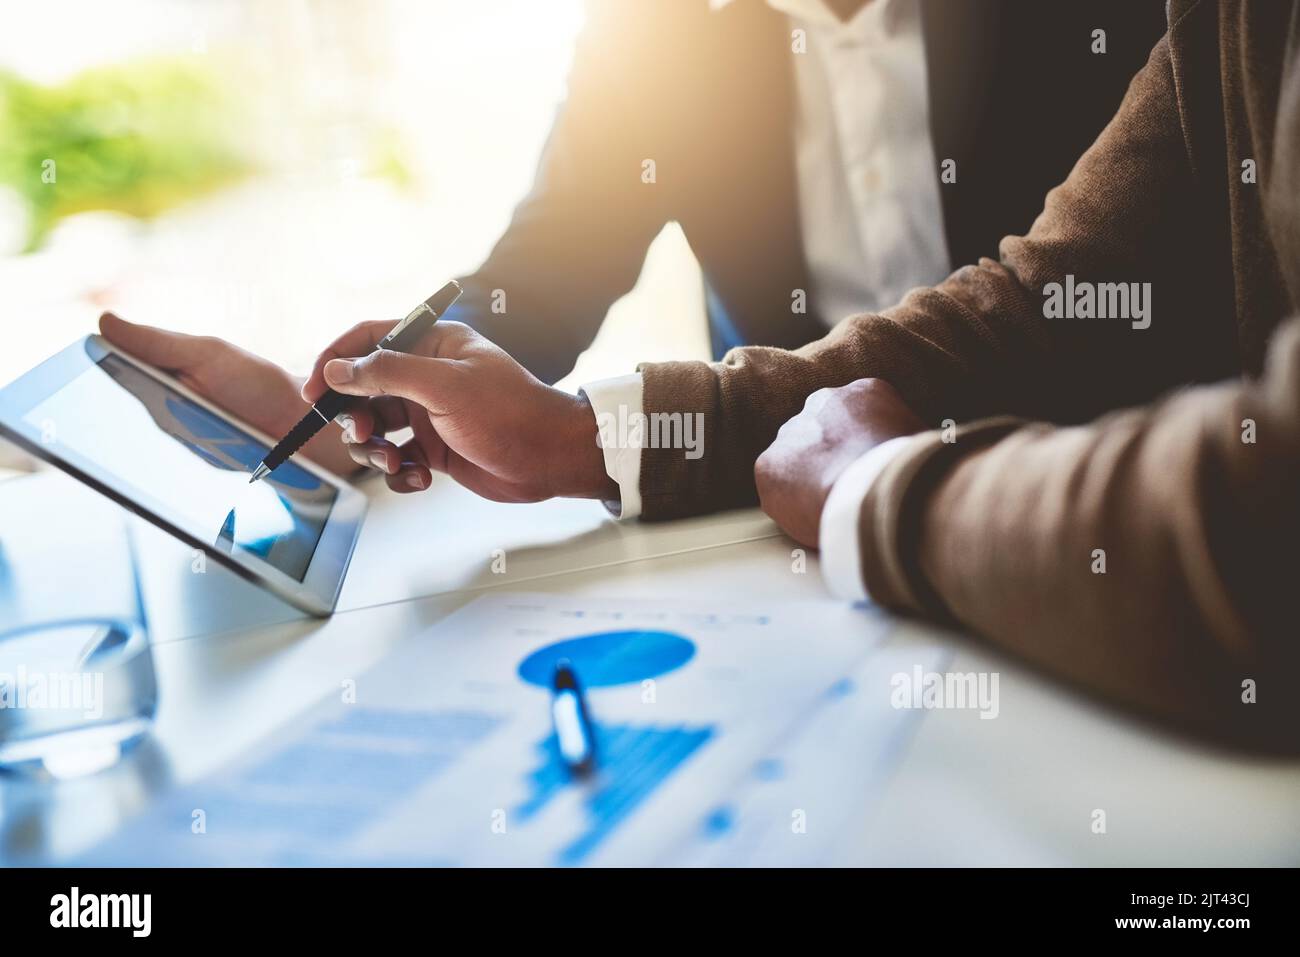 Expanding on their business potential together. Closeup shot of two unidentifiable businessmen working together on a digital tablet in an office. Stock Photo